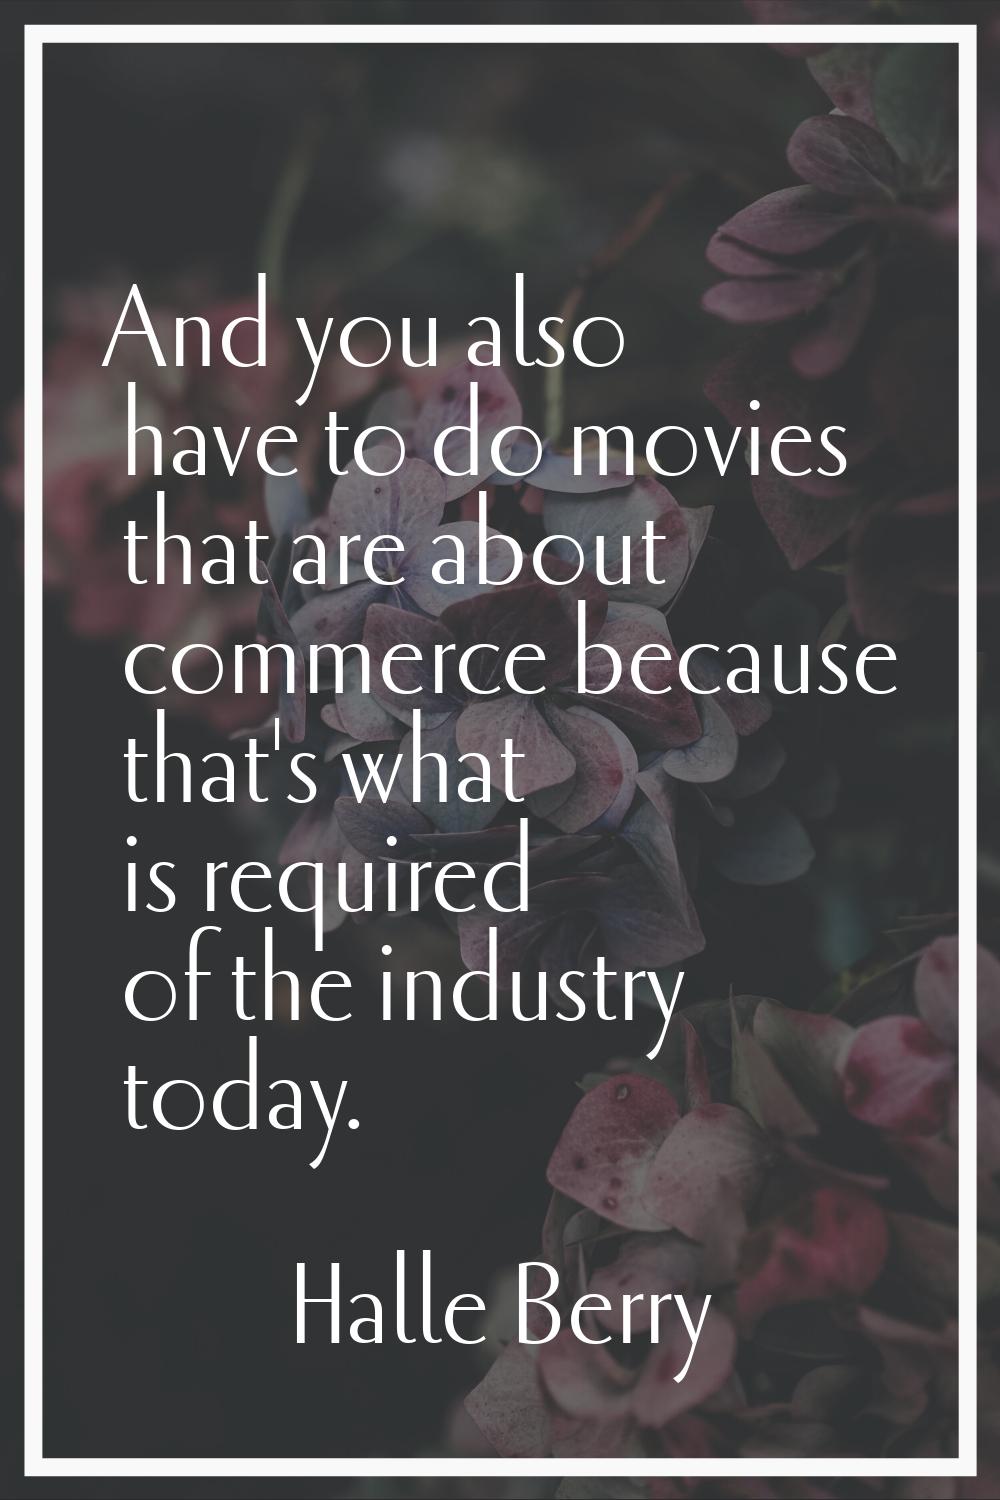 And you also have to do movies that are about commerce because that's what is required of the indus